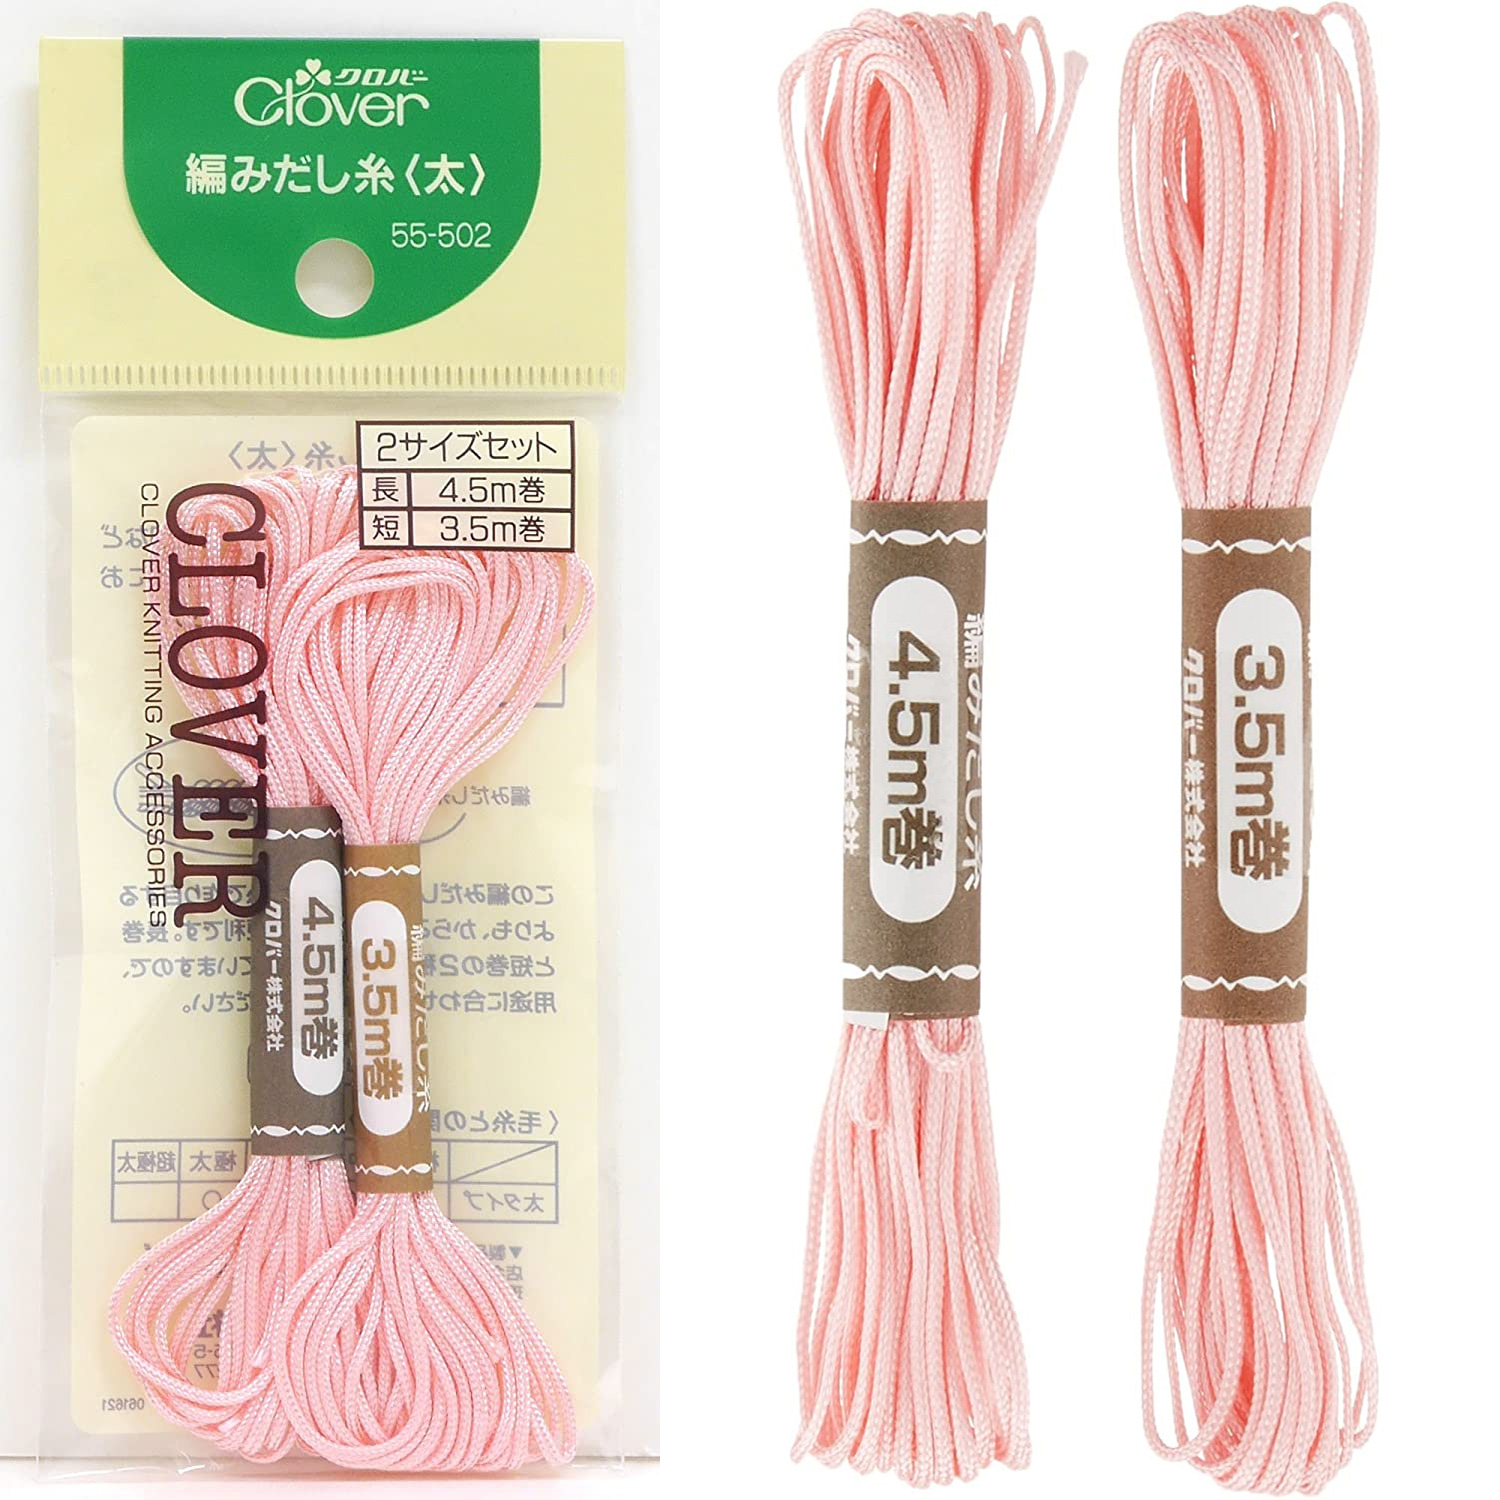 CL55-502 Clover Braid for Knitting, thick type (pcs)